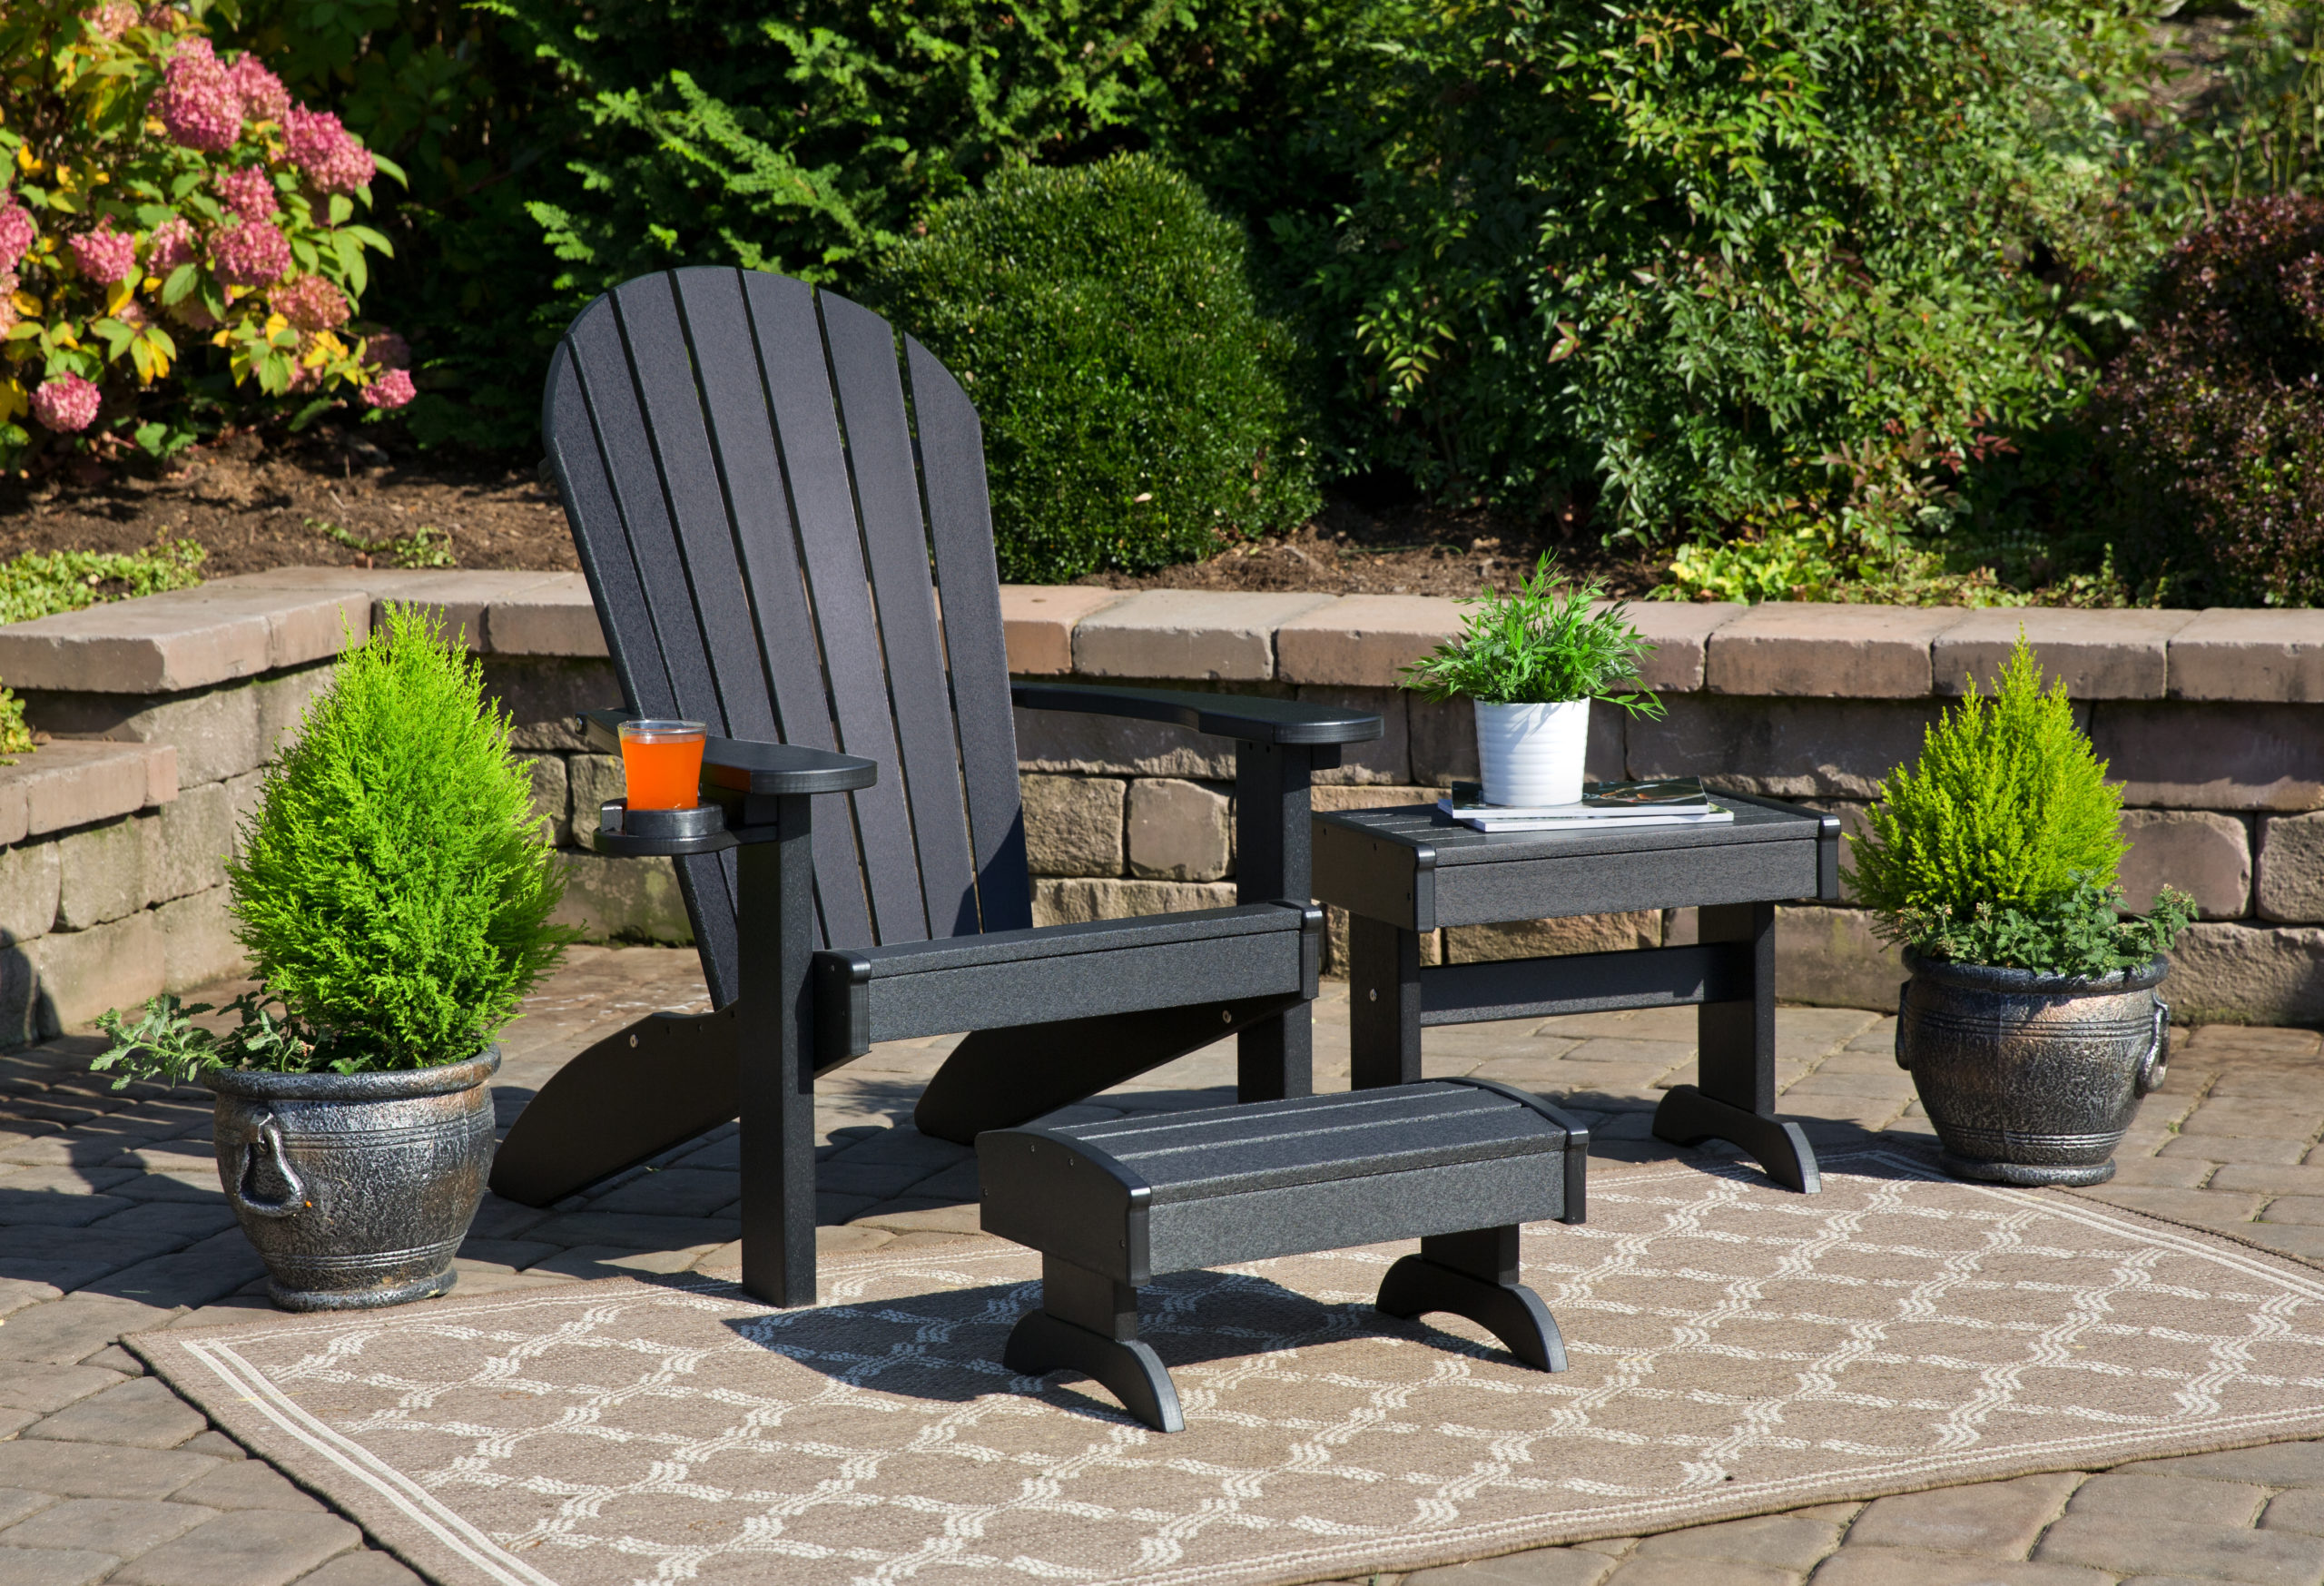 Black poly Adirondack chair, side table, footstool.